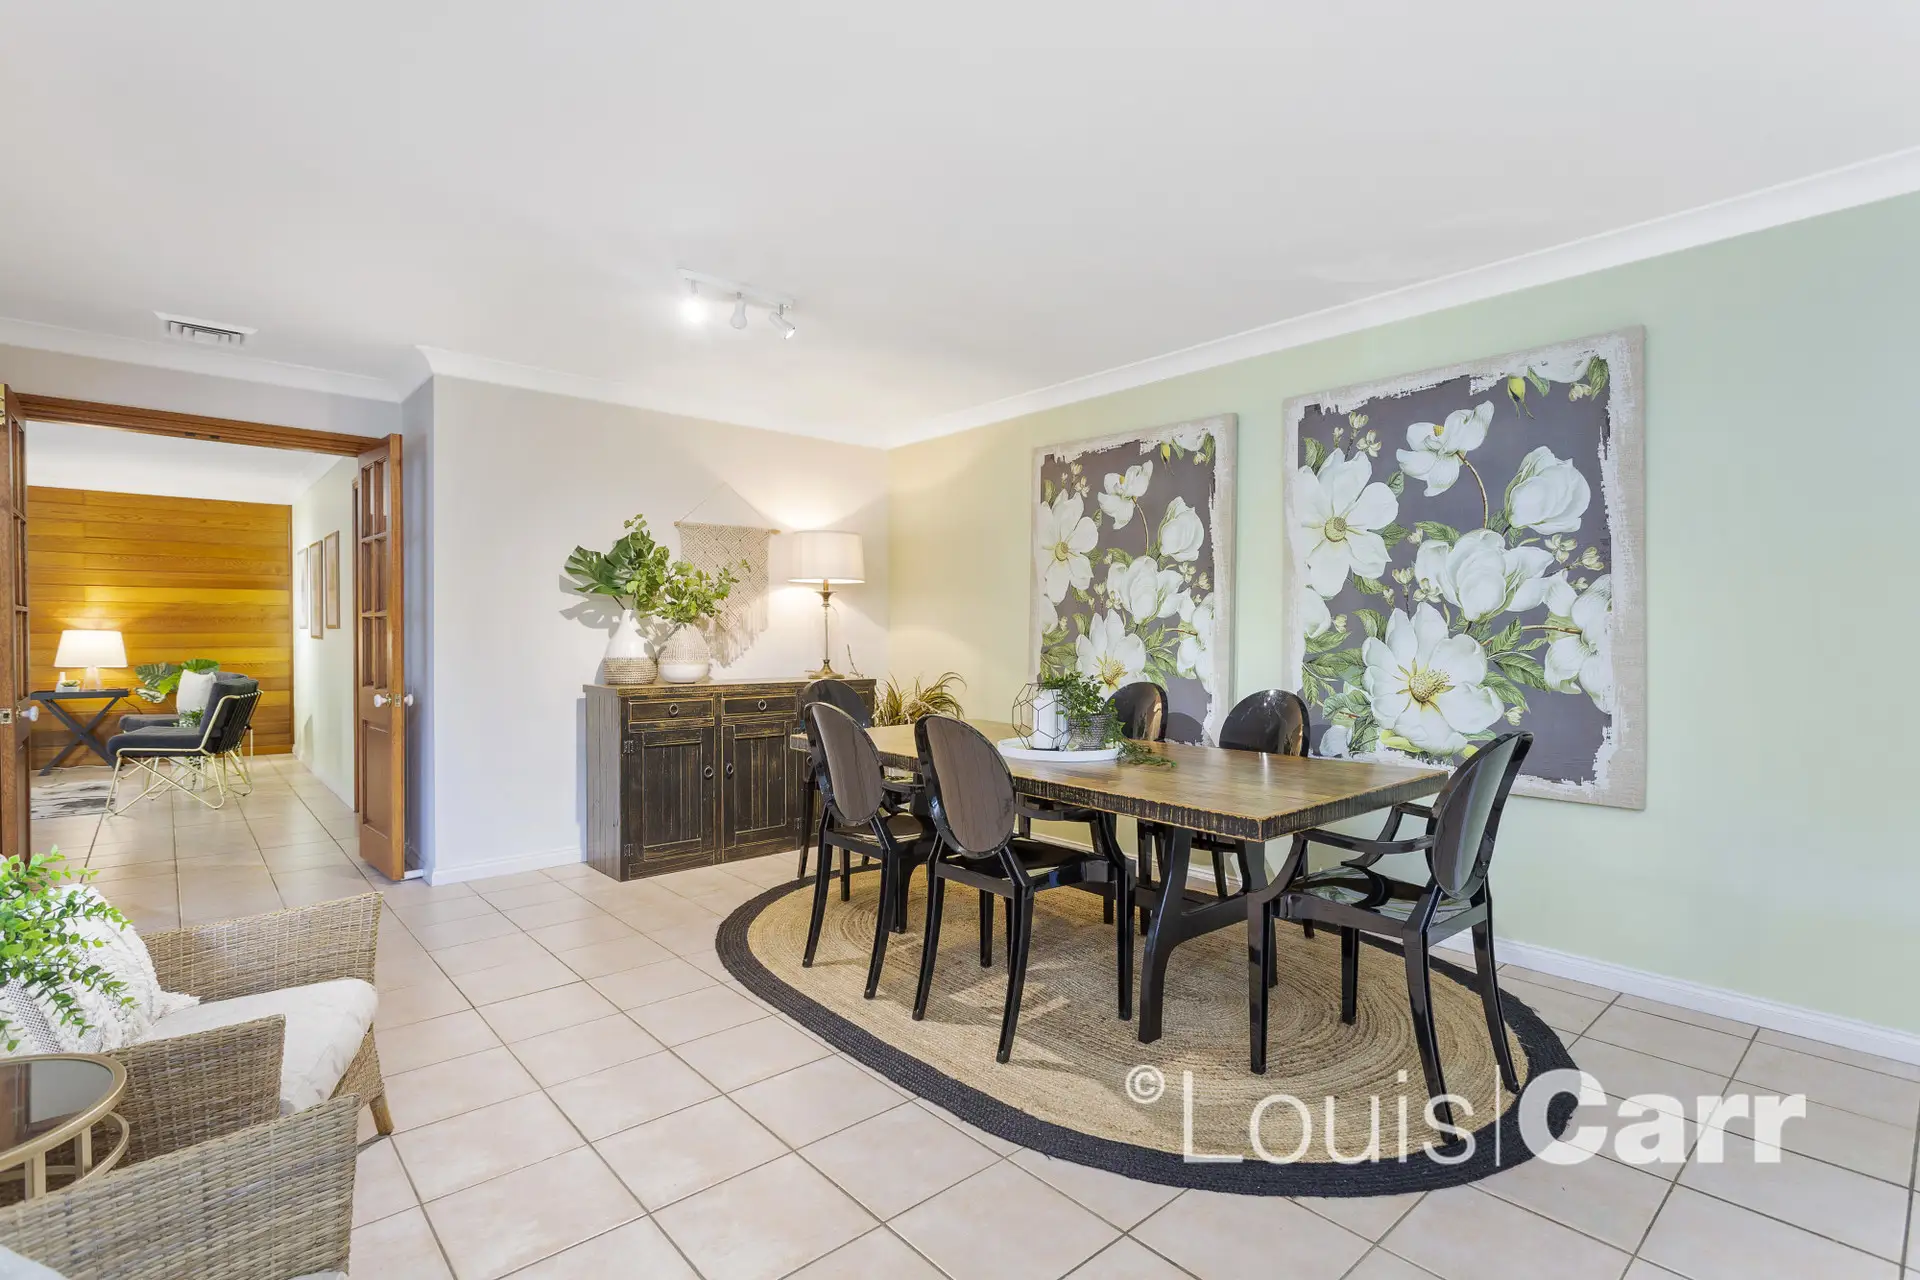 Photo #8: 7 Tambaroora Place, West Pennant Hills - Sold by Louis Carr Real Estate